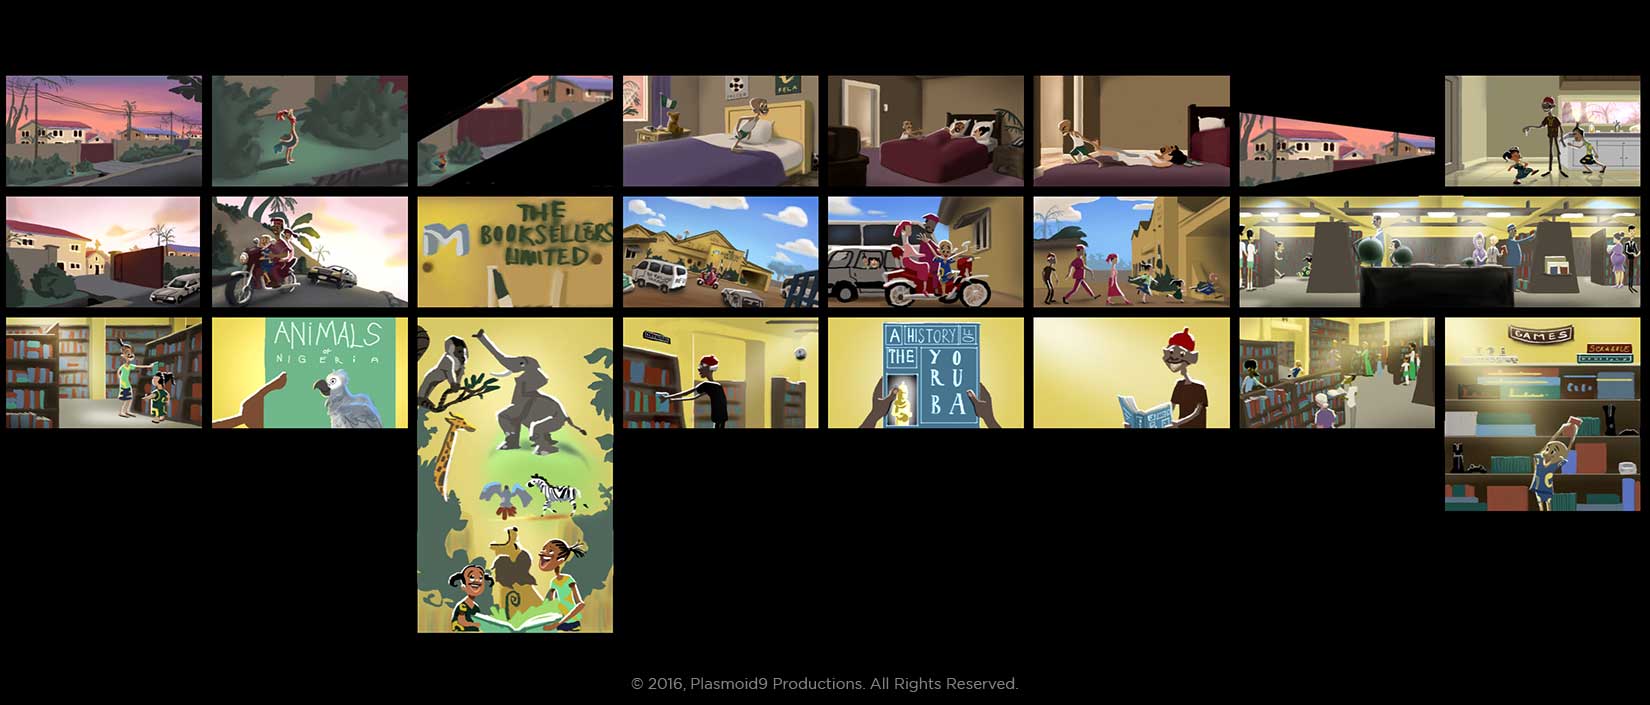 The Colour Script for the animated short.